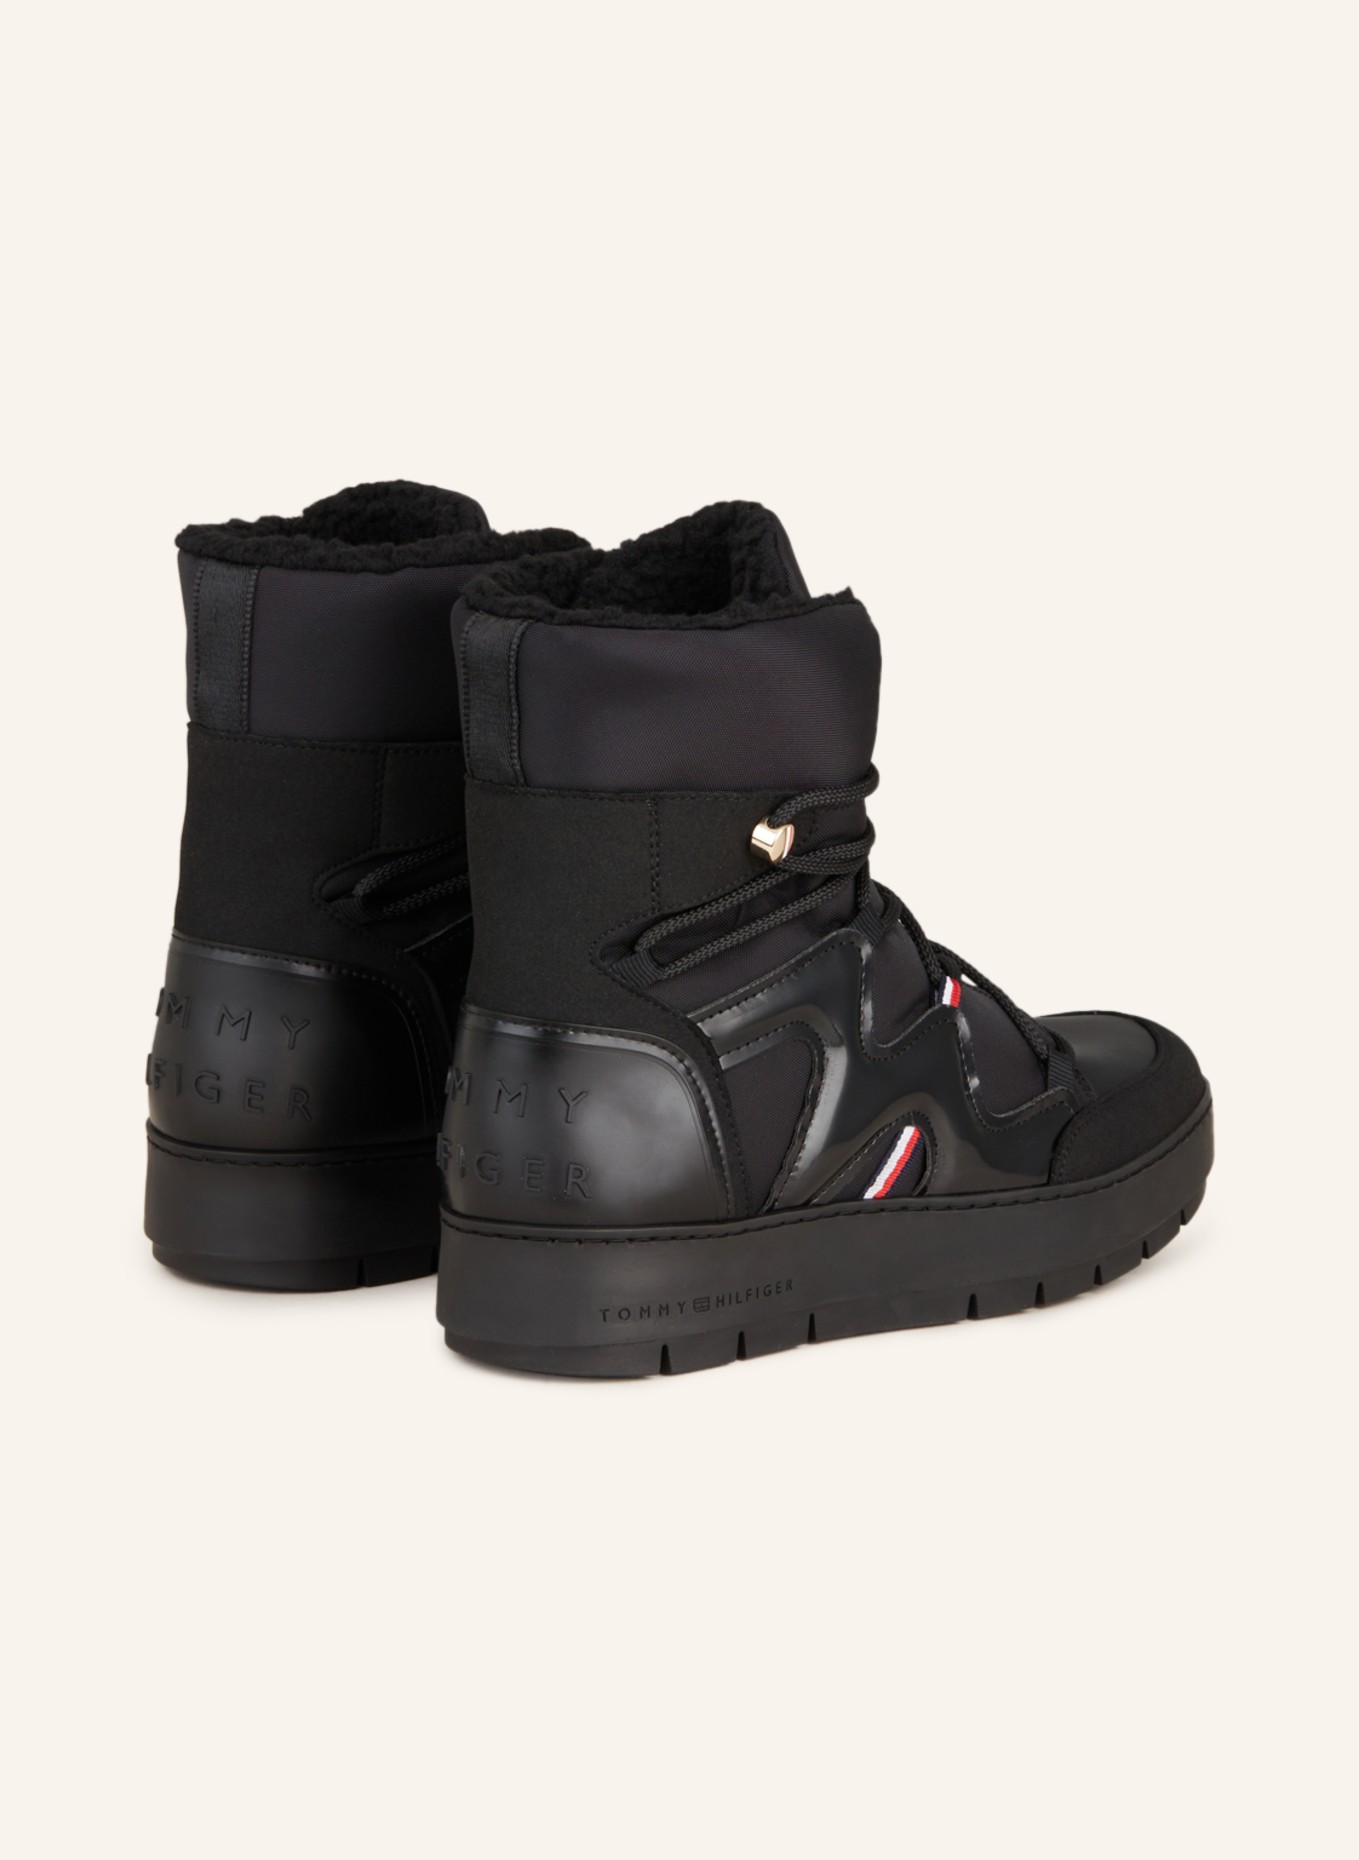 HILFIGER Lace-up boots black in TOMMY